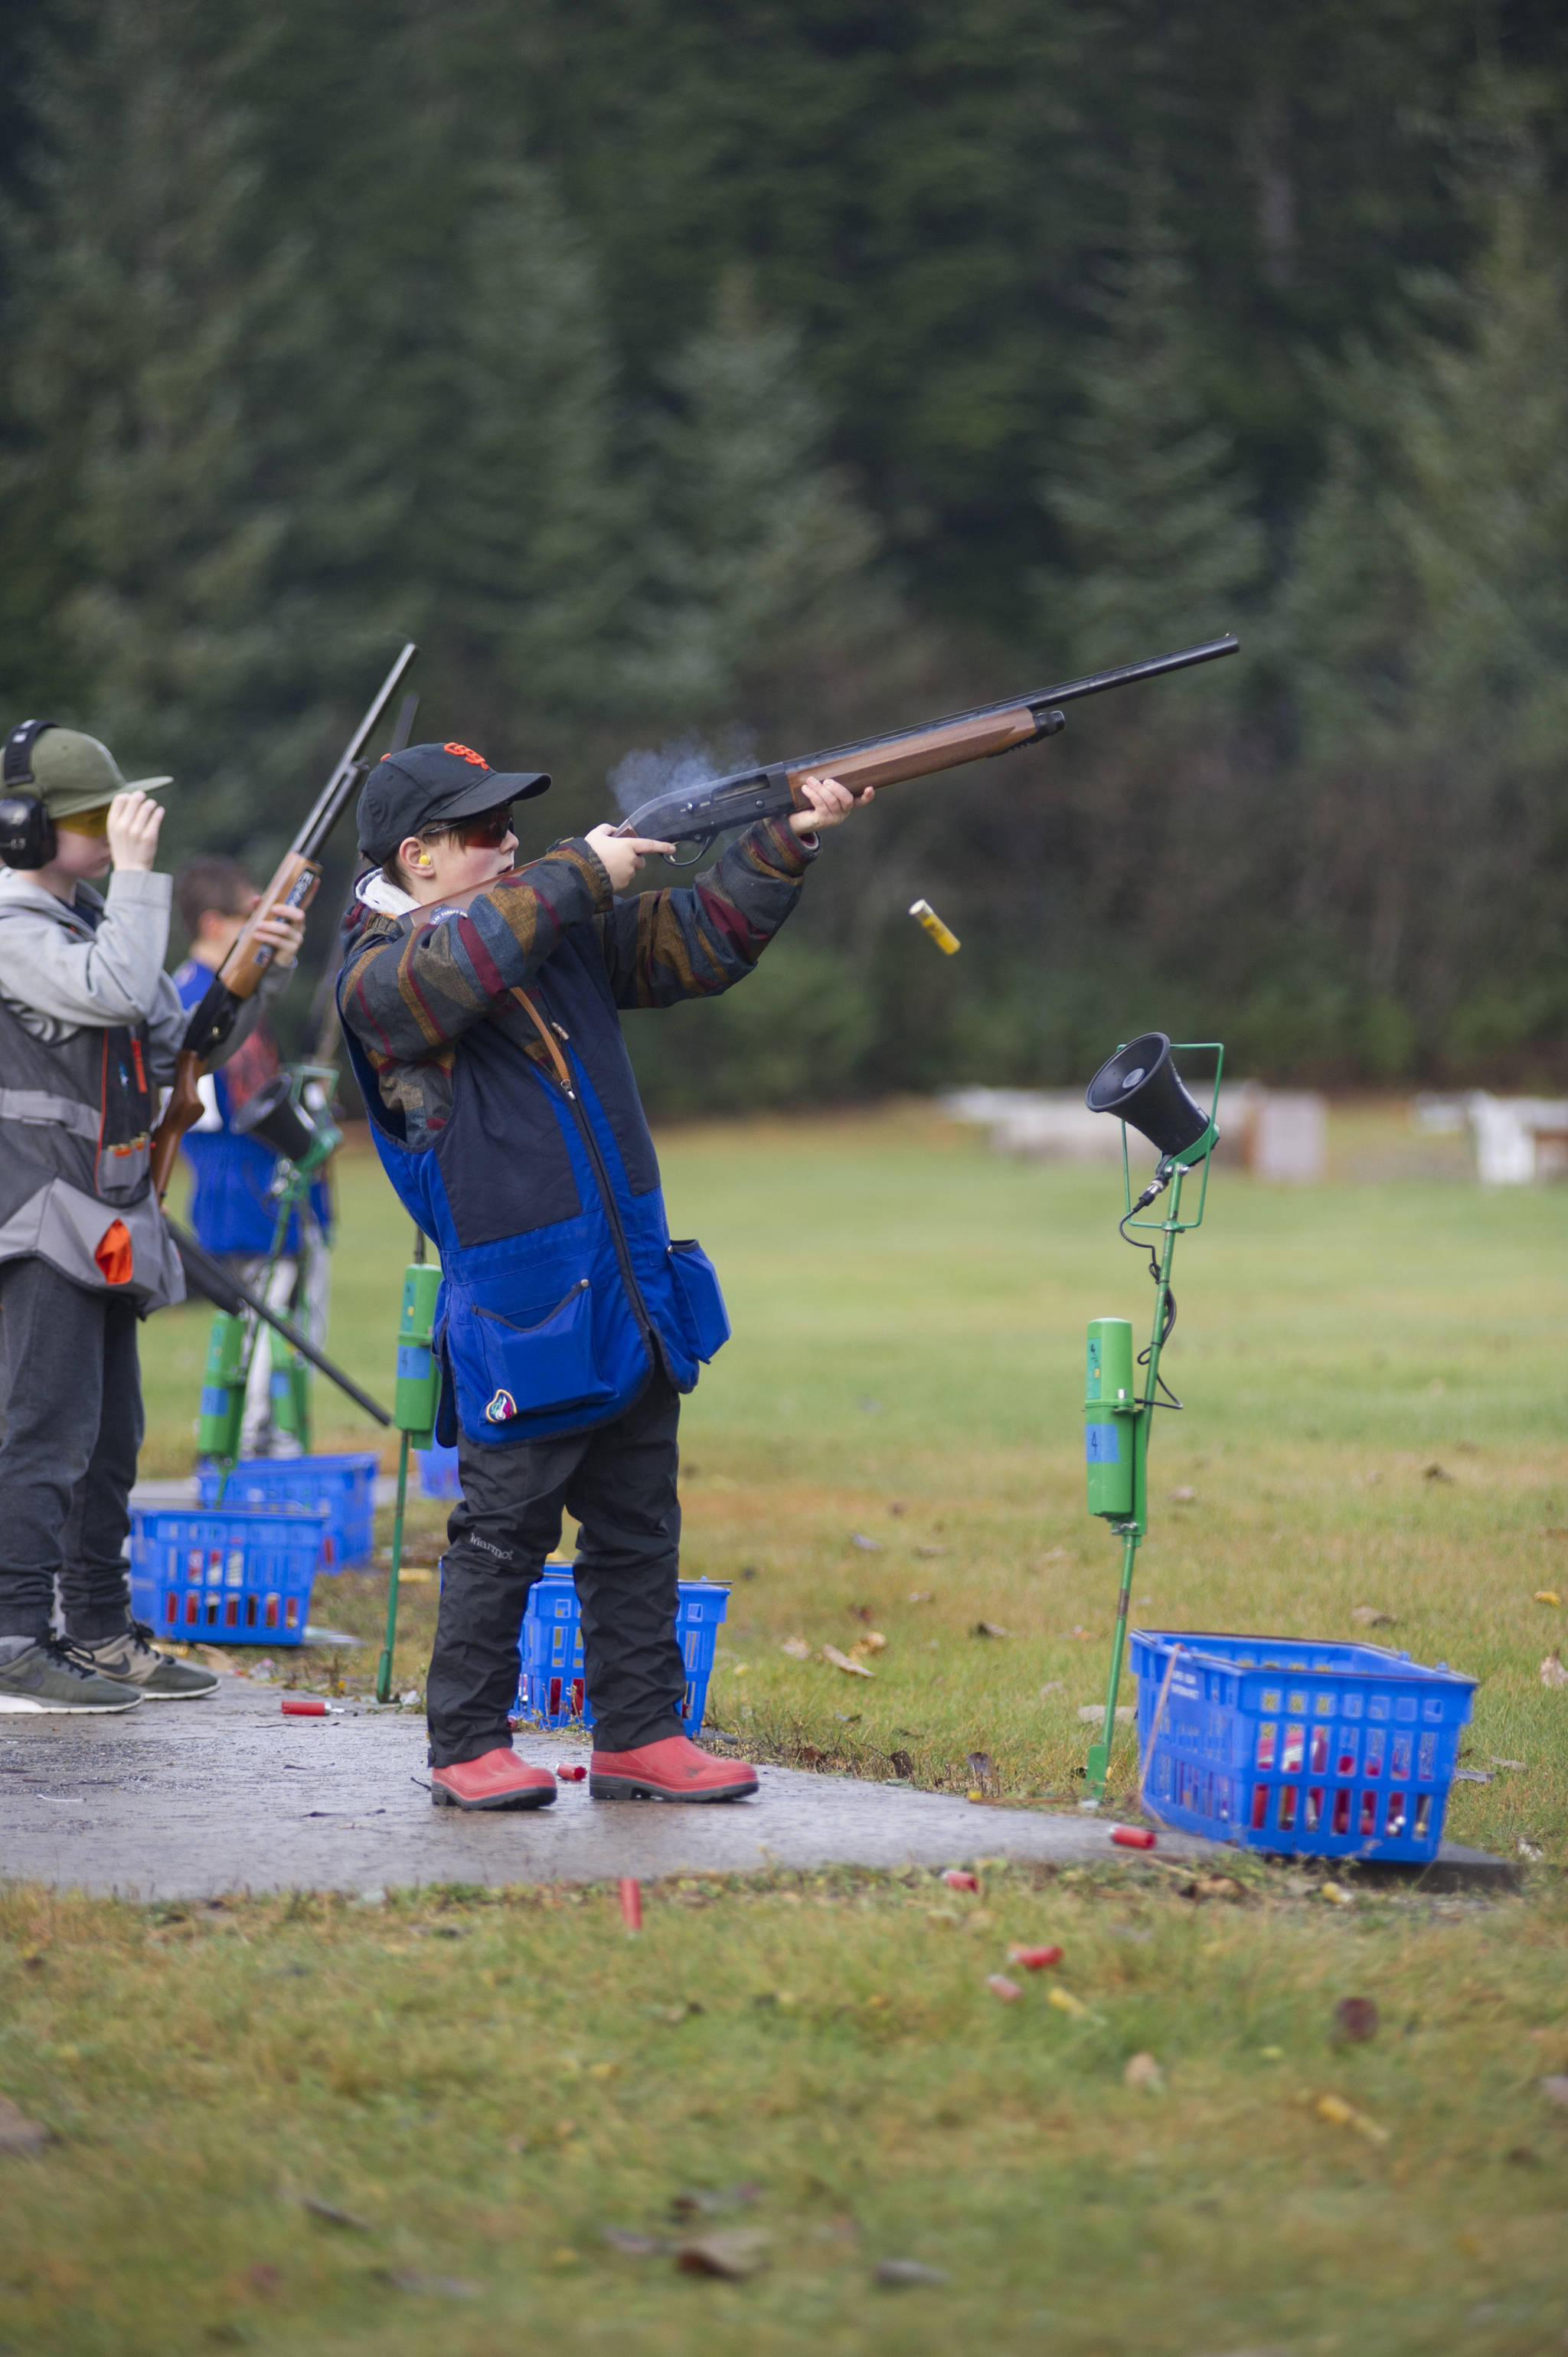 Will Tormey, of Haines, competes in single trap during the fourth annual Southeast Fall Shoot Tournament on Saturday at the Juneau Gun Club. At 10 years old, Tormey was one of the youngest shooters at the event, which lasted two days. (Nolin Ainsworth | Juneau Empire)